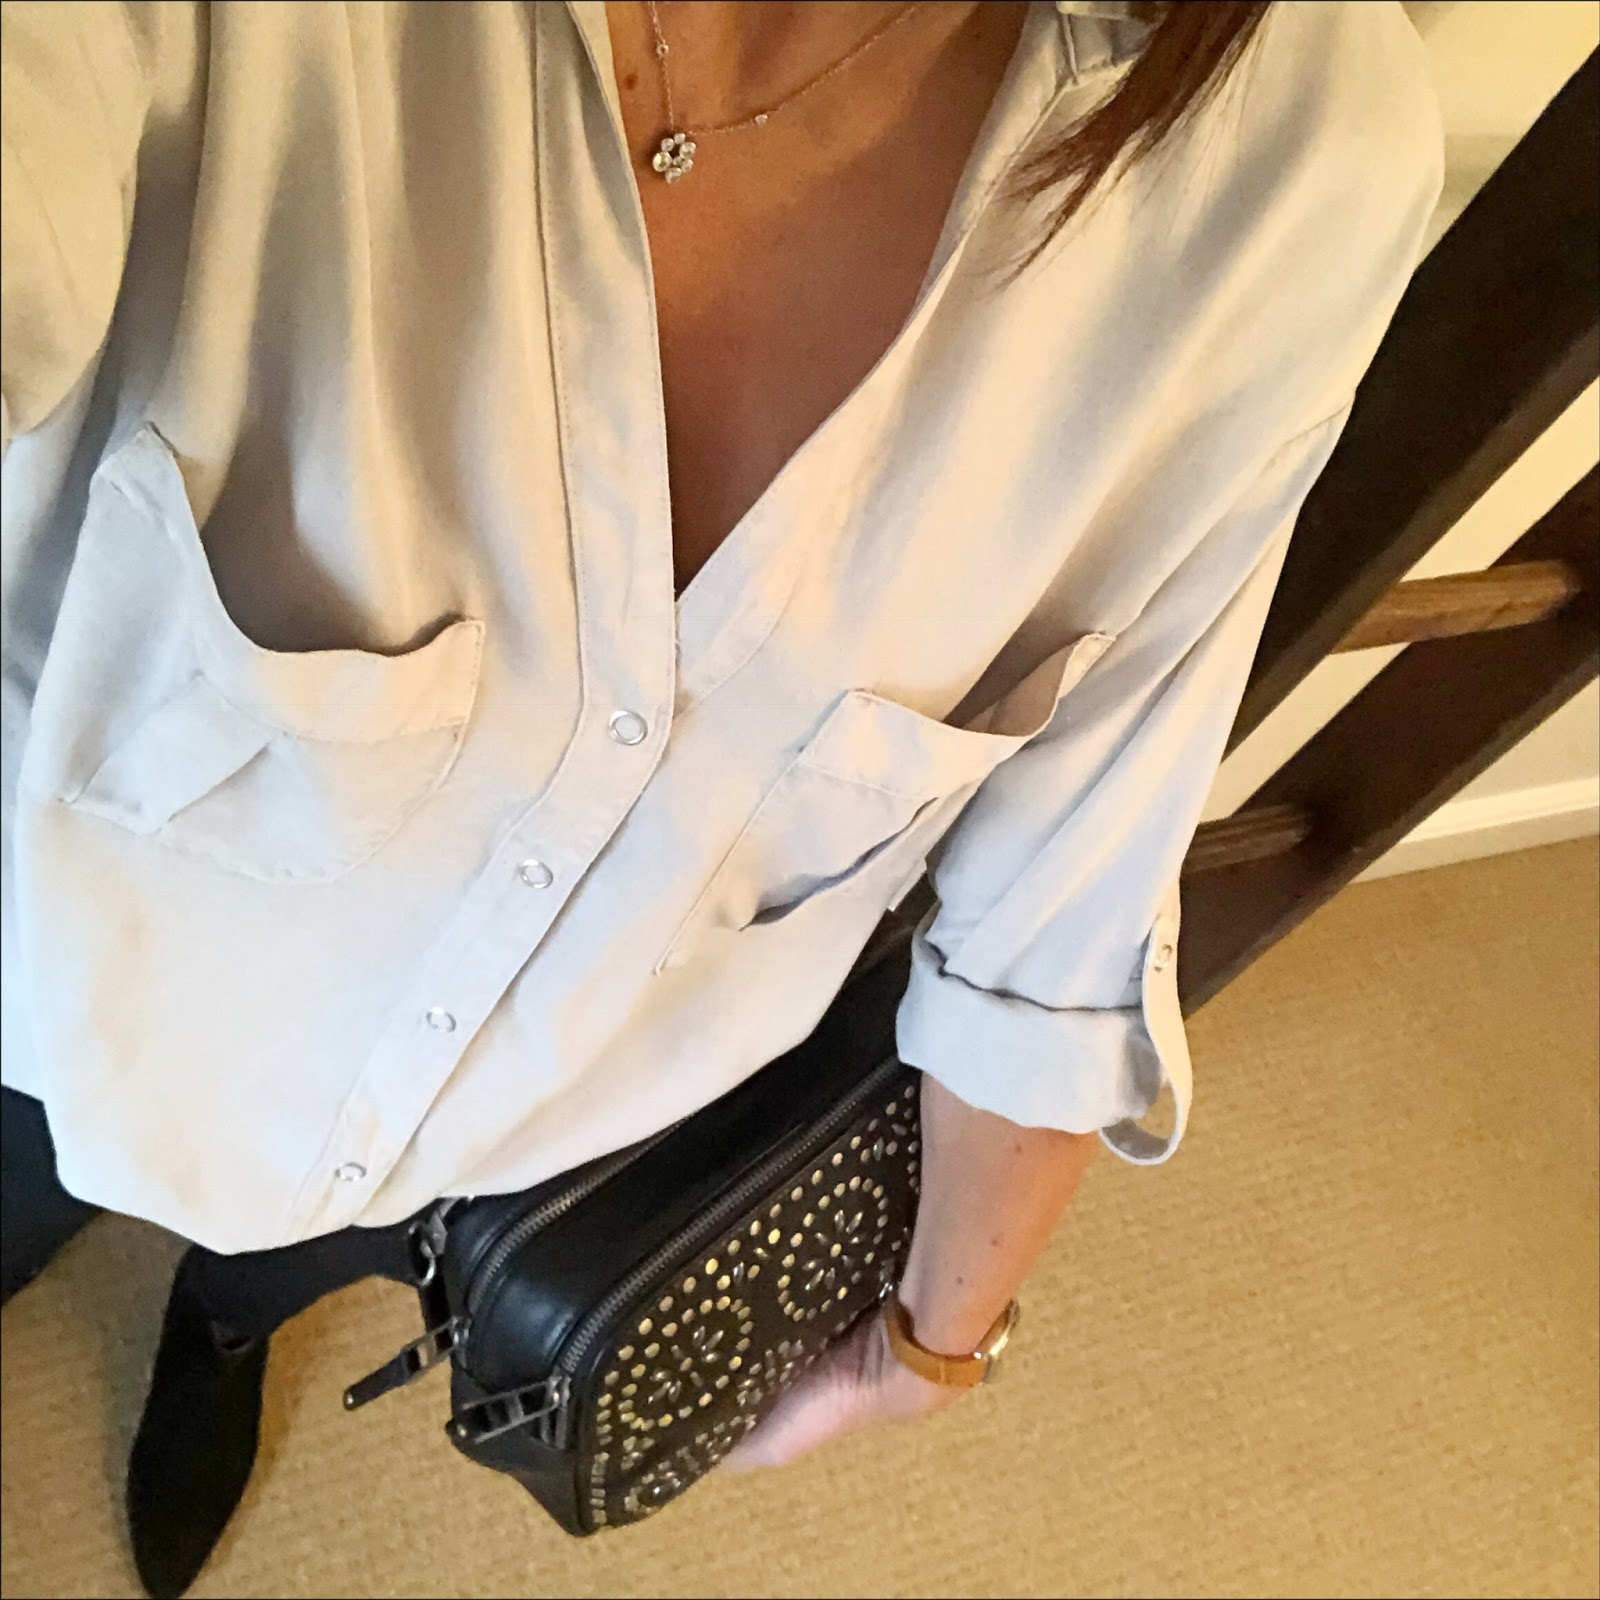 my midlife fashion, zara shirt with pocks, j crew 8" toothpick skinny jeans, village england penshaw across body studded bag, iro pointed flat suede ankle boots